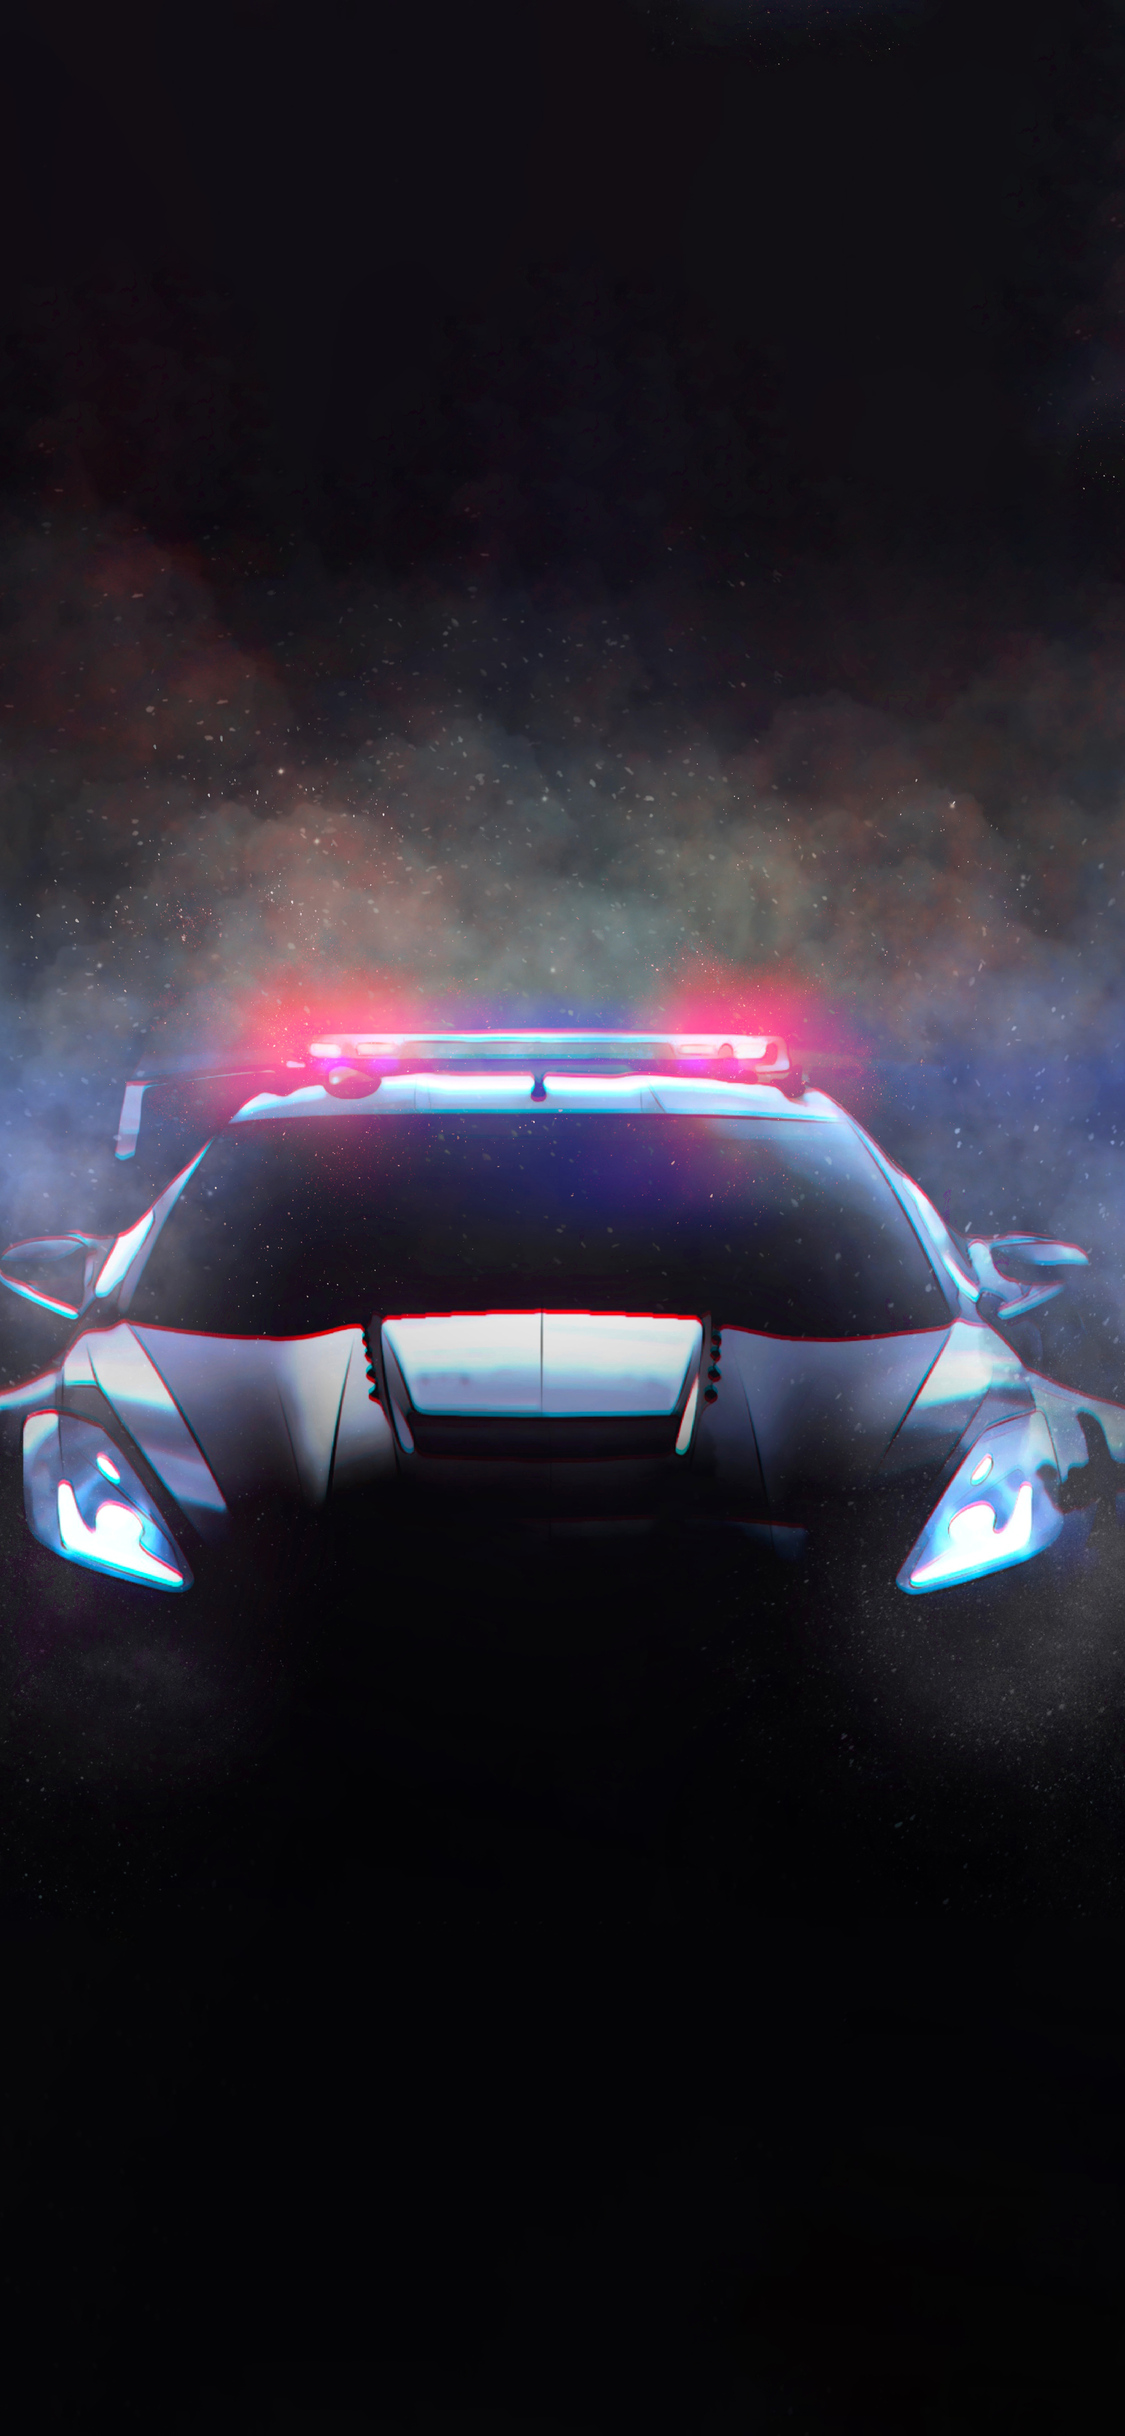 Police Iphone Wallpapers